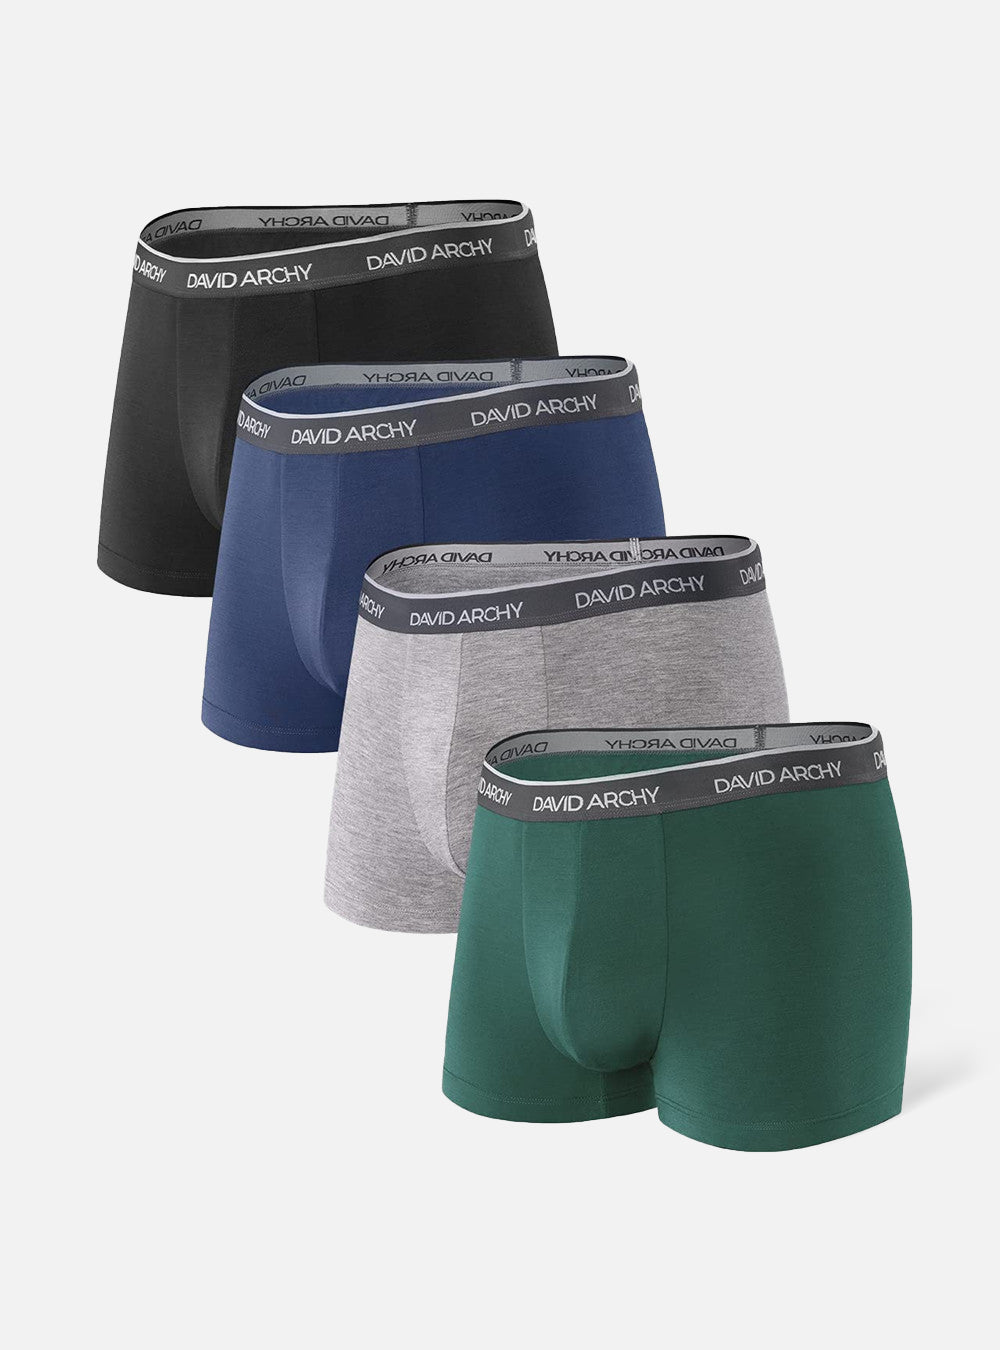 DAVID ARCHY Men's Underwear Breathable Boxer Briefs Bamboo Rayon Super Soft  Trunks with Fly in 4 Pack (S, Black/Dark Gray/Navy Blue/Heather Gray - 5.  inchesin 4 Pack) : : Clothing, Shoes 